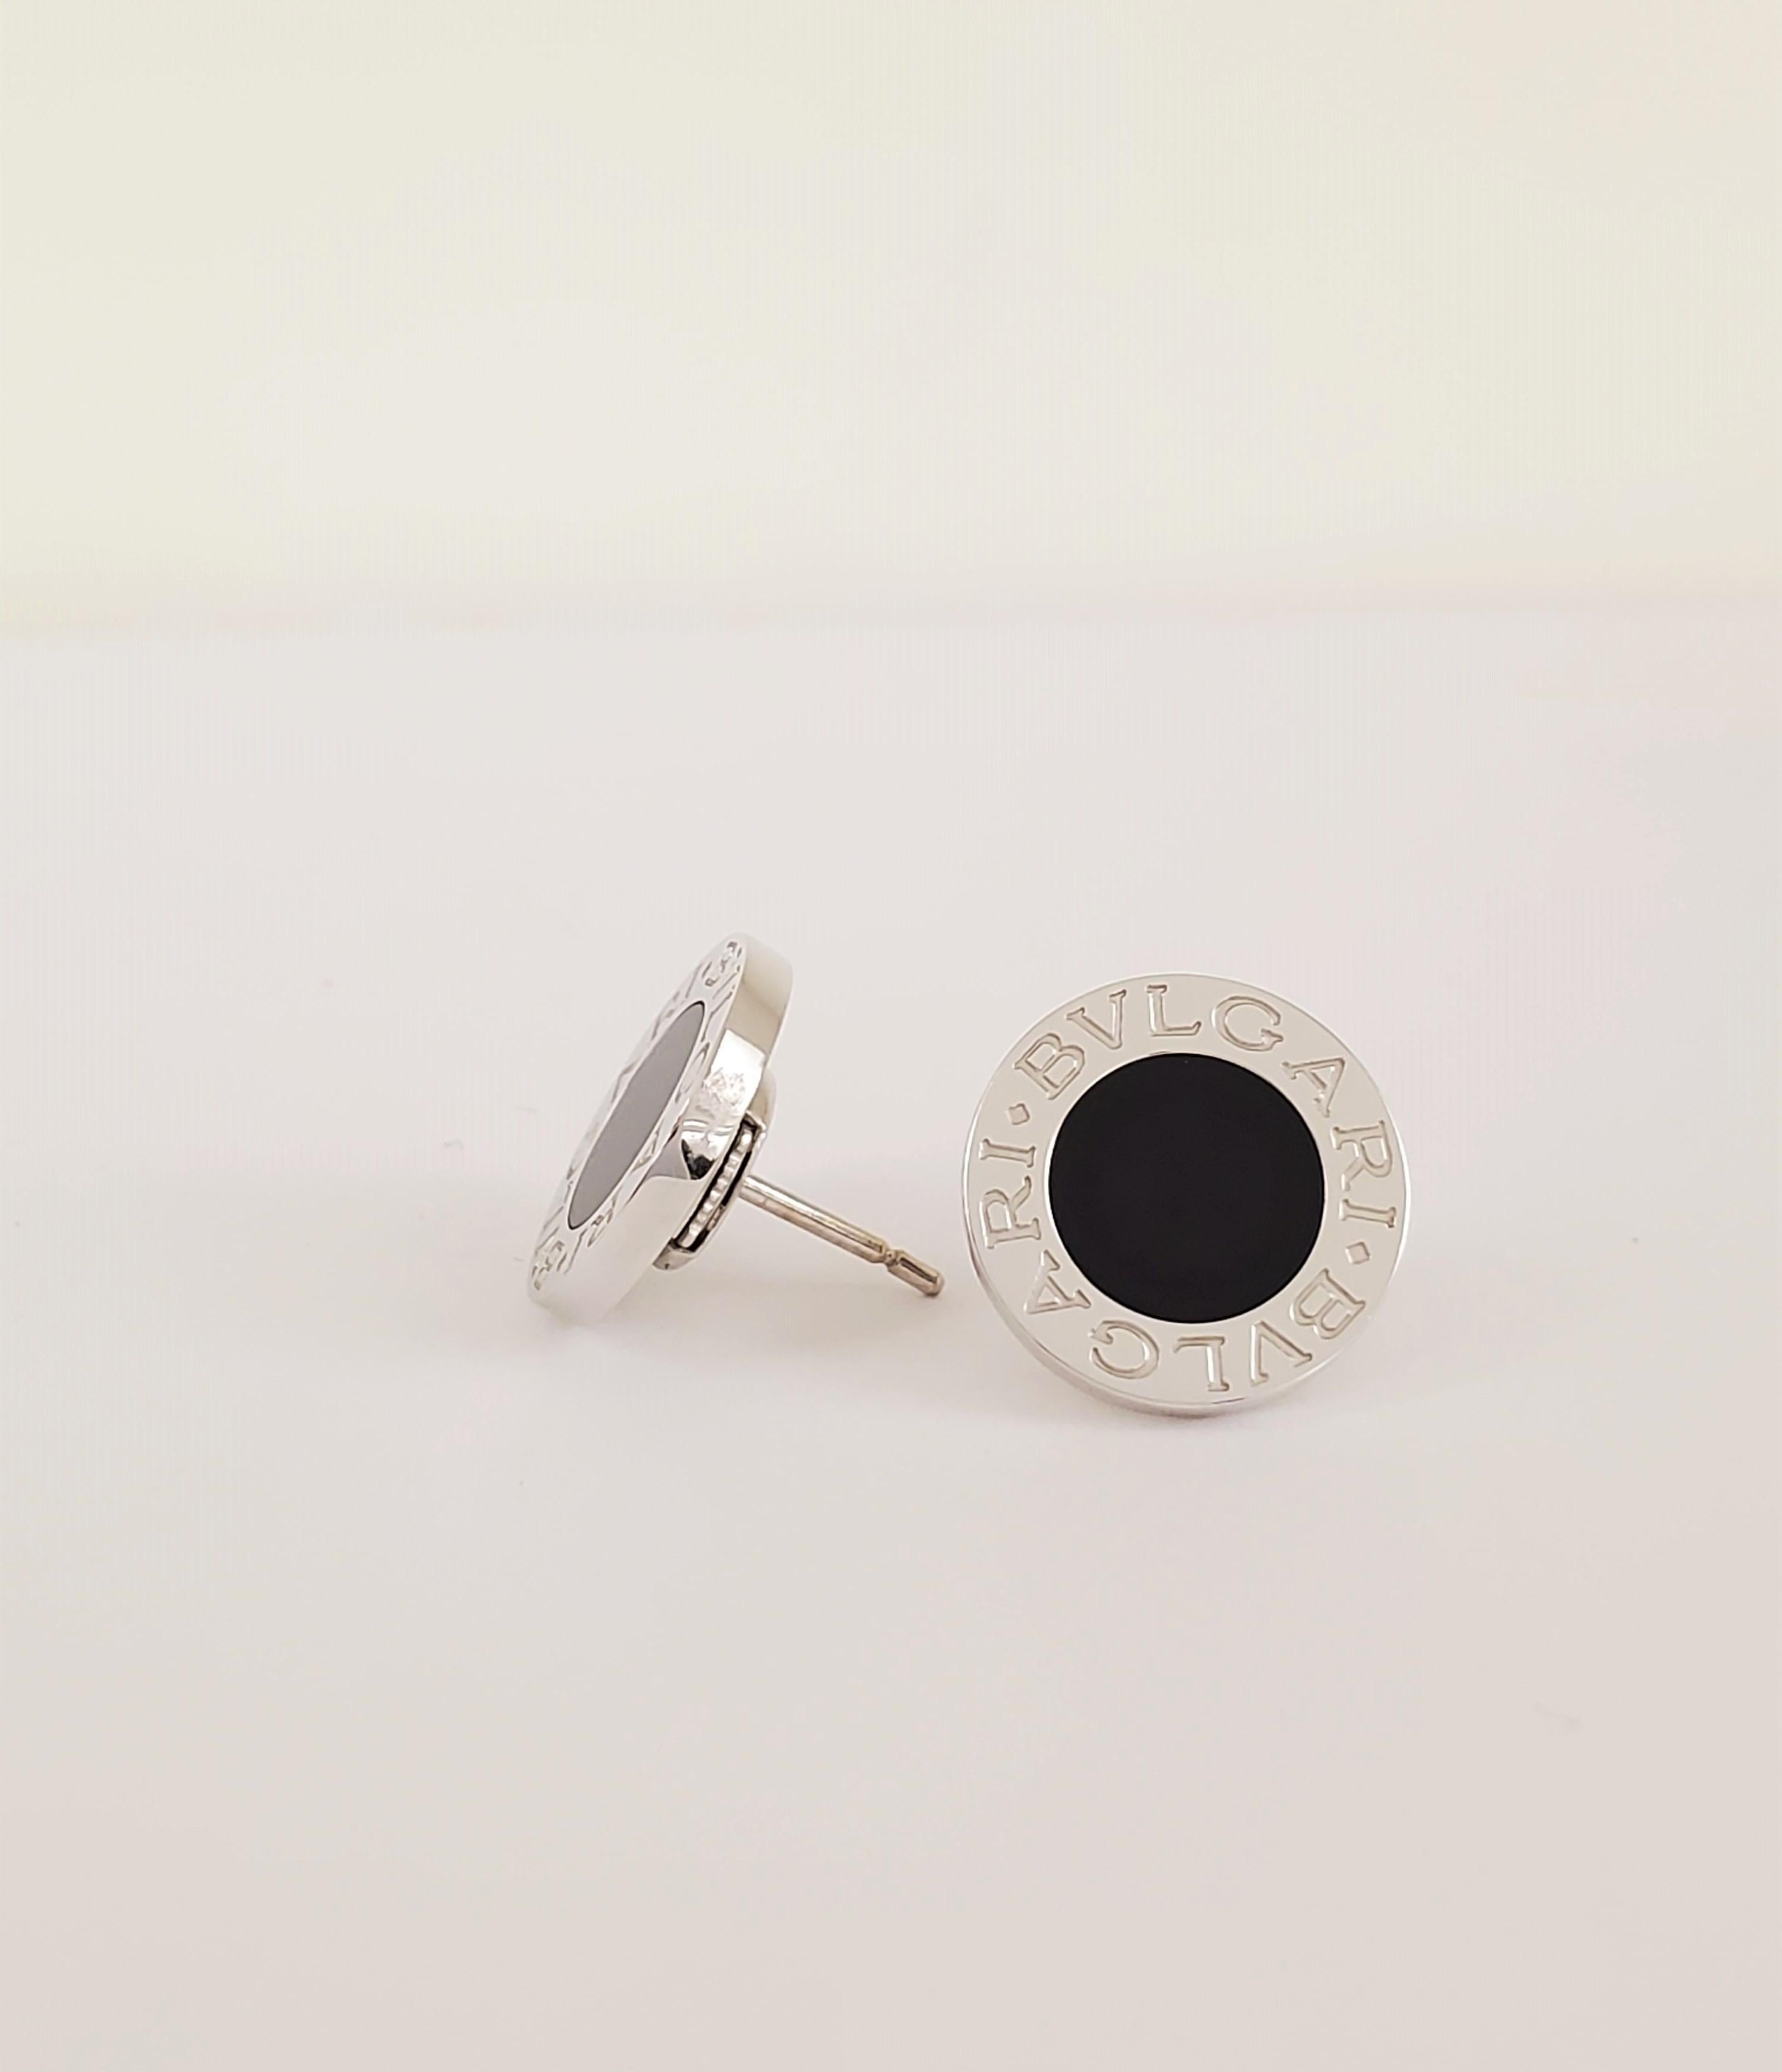 Authentic Bulgari earrings crafted in 18 karat white gold and featuring a round onyx center.  The earrings measure 1/2 inch wide.  Signed Bulgari, 750, Made in Italy, with serial number.  Earring backs are also stamped Bulgari, 750, Made in Italy.  